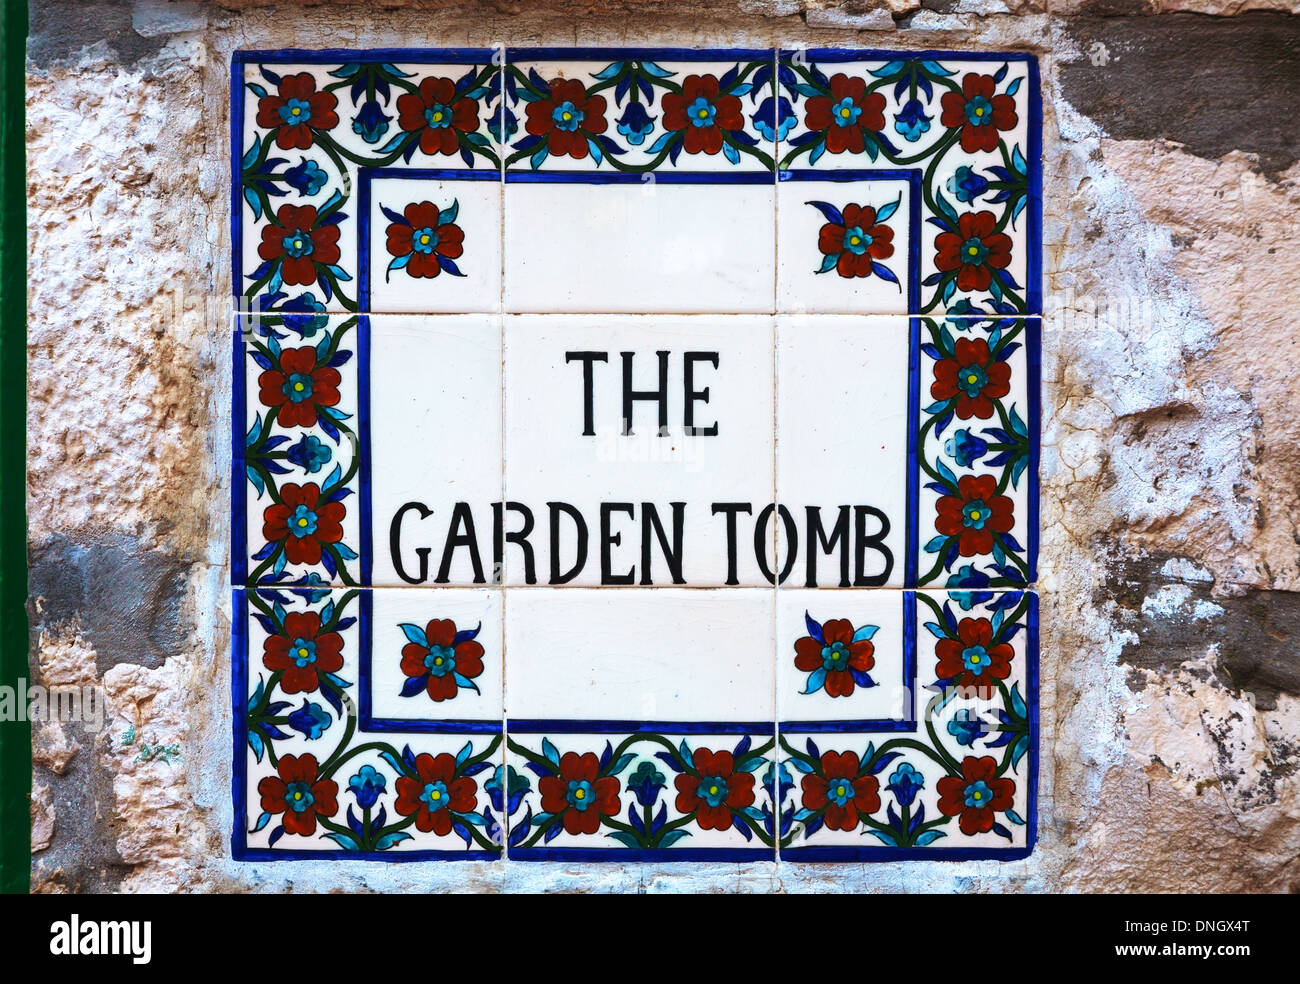 The Garden Tomb sign in Jerusalem, Israel Stock Photo